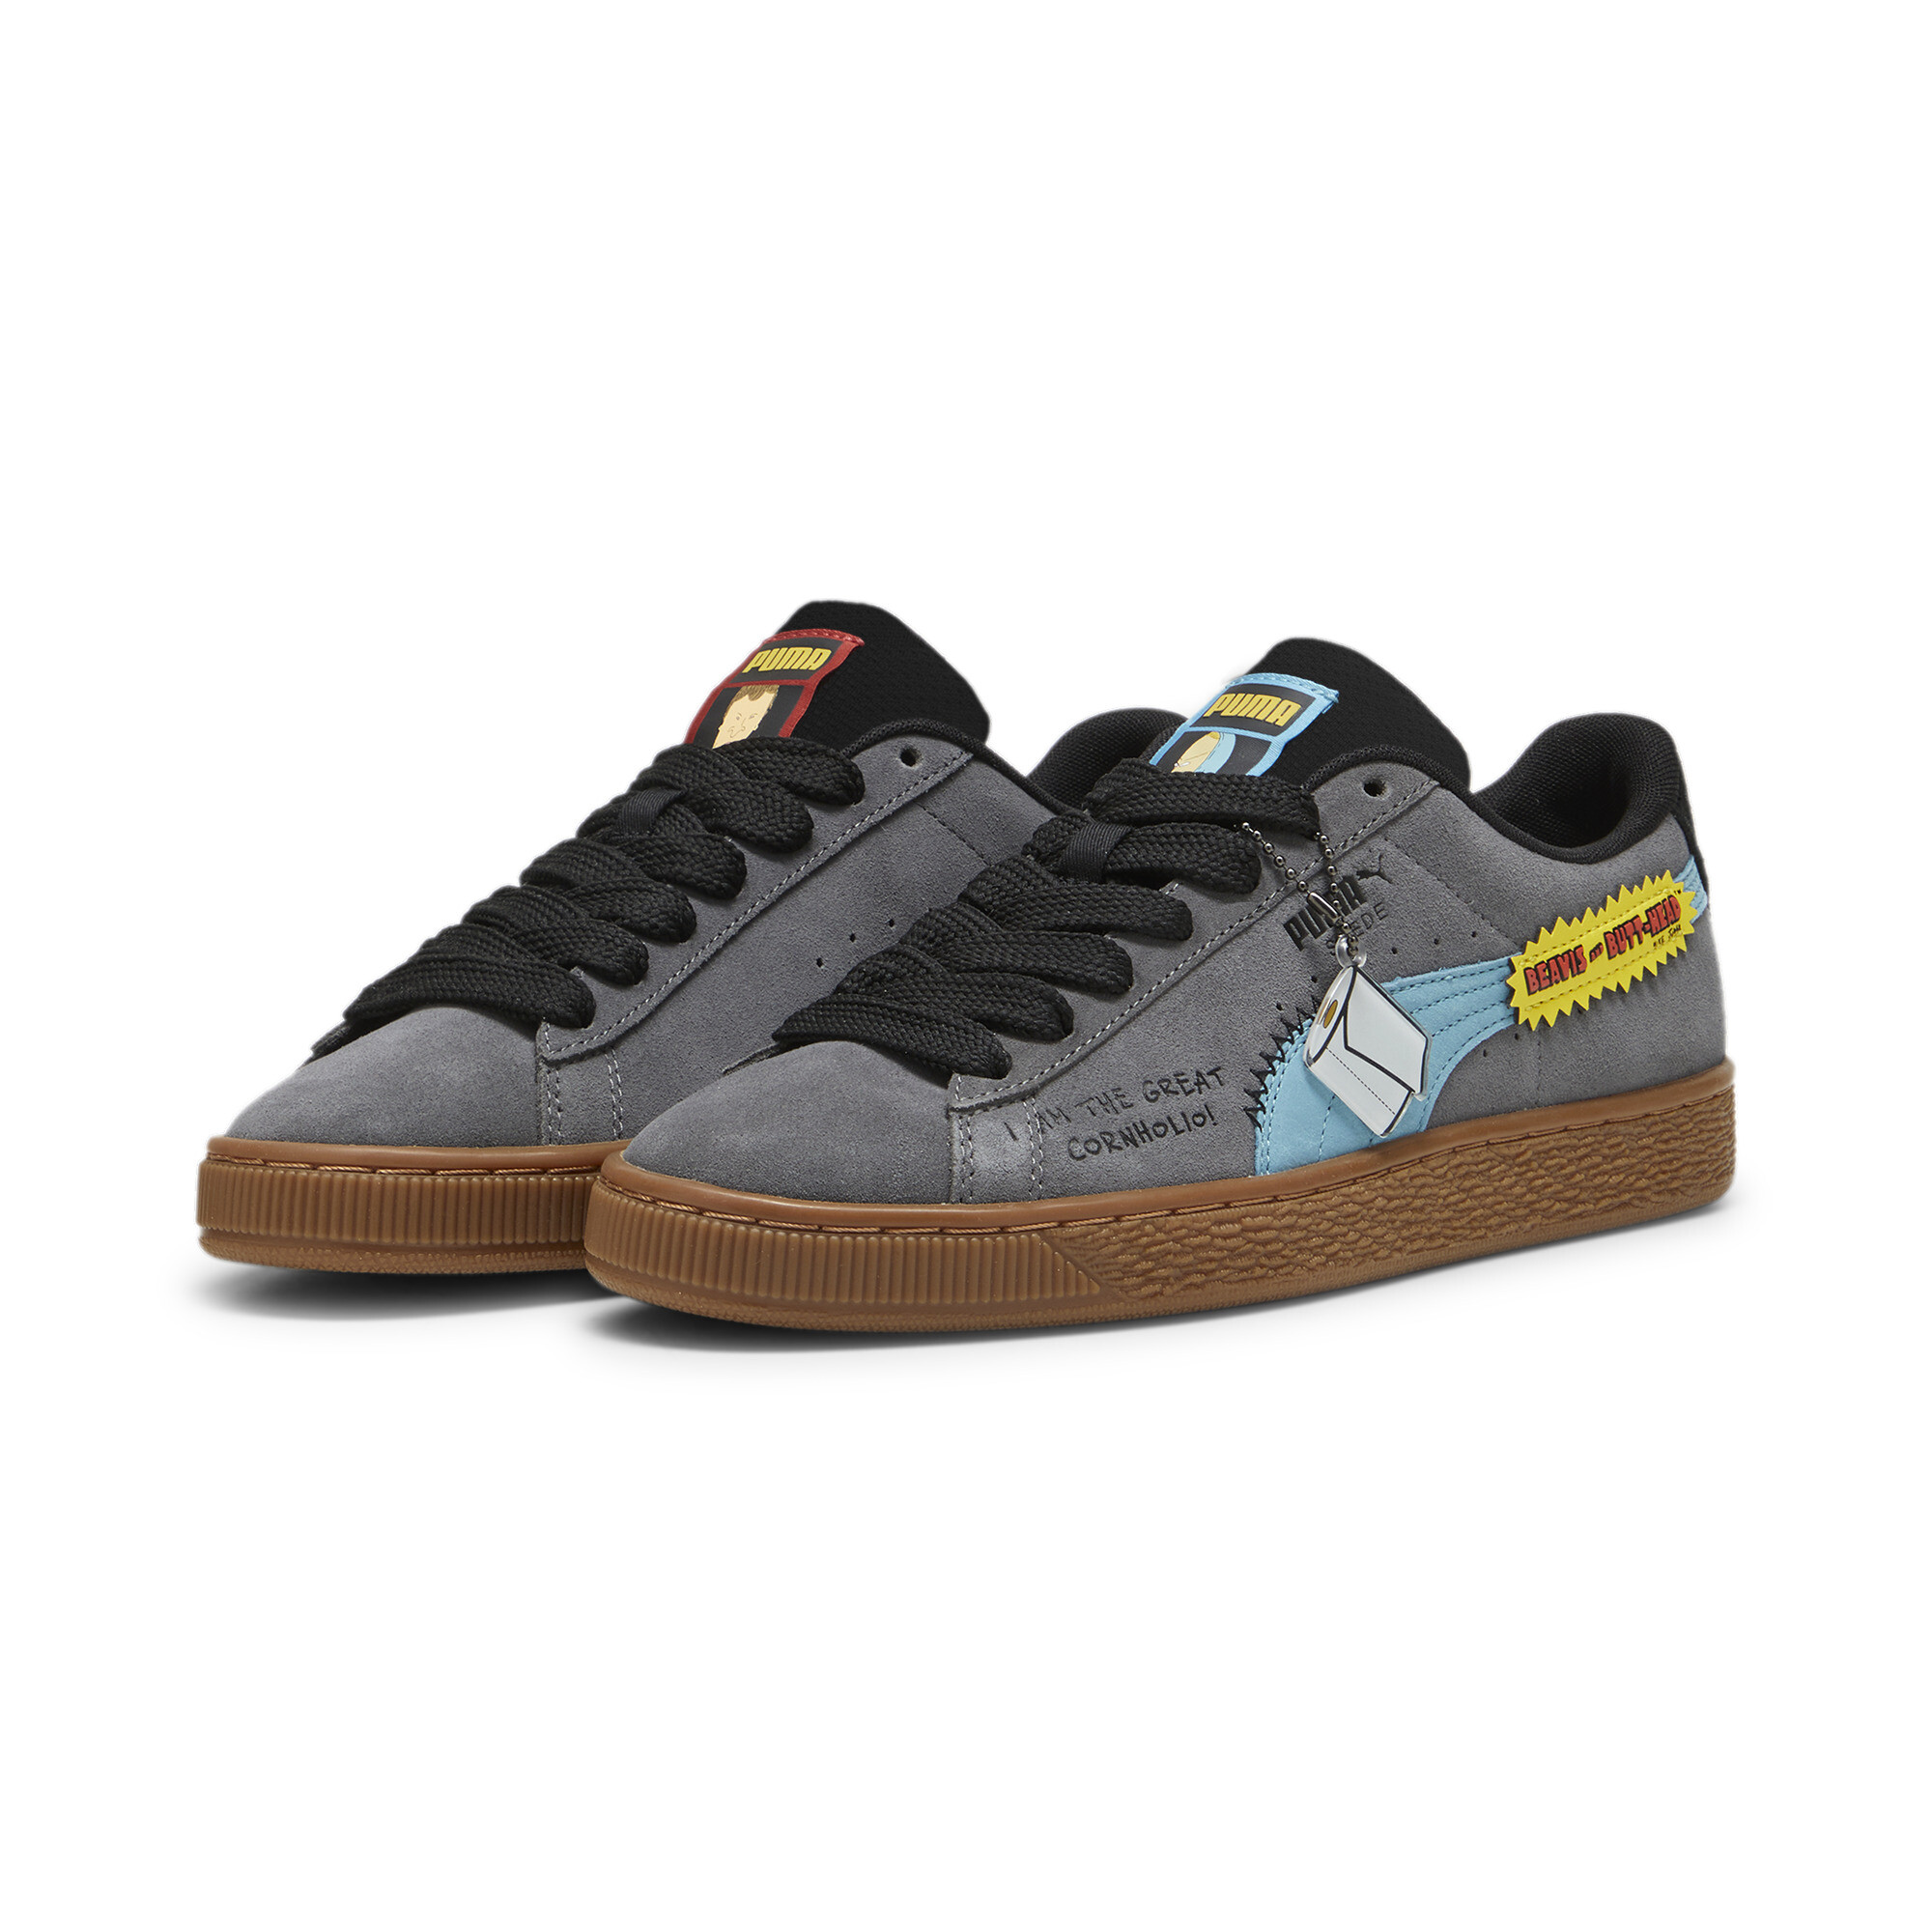 Men's Puma X BEAVIS AND BUTTHEAD Suede Sneakers, Gray, Size 37.5, Shoes